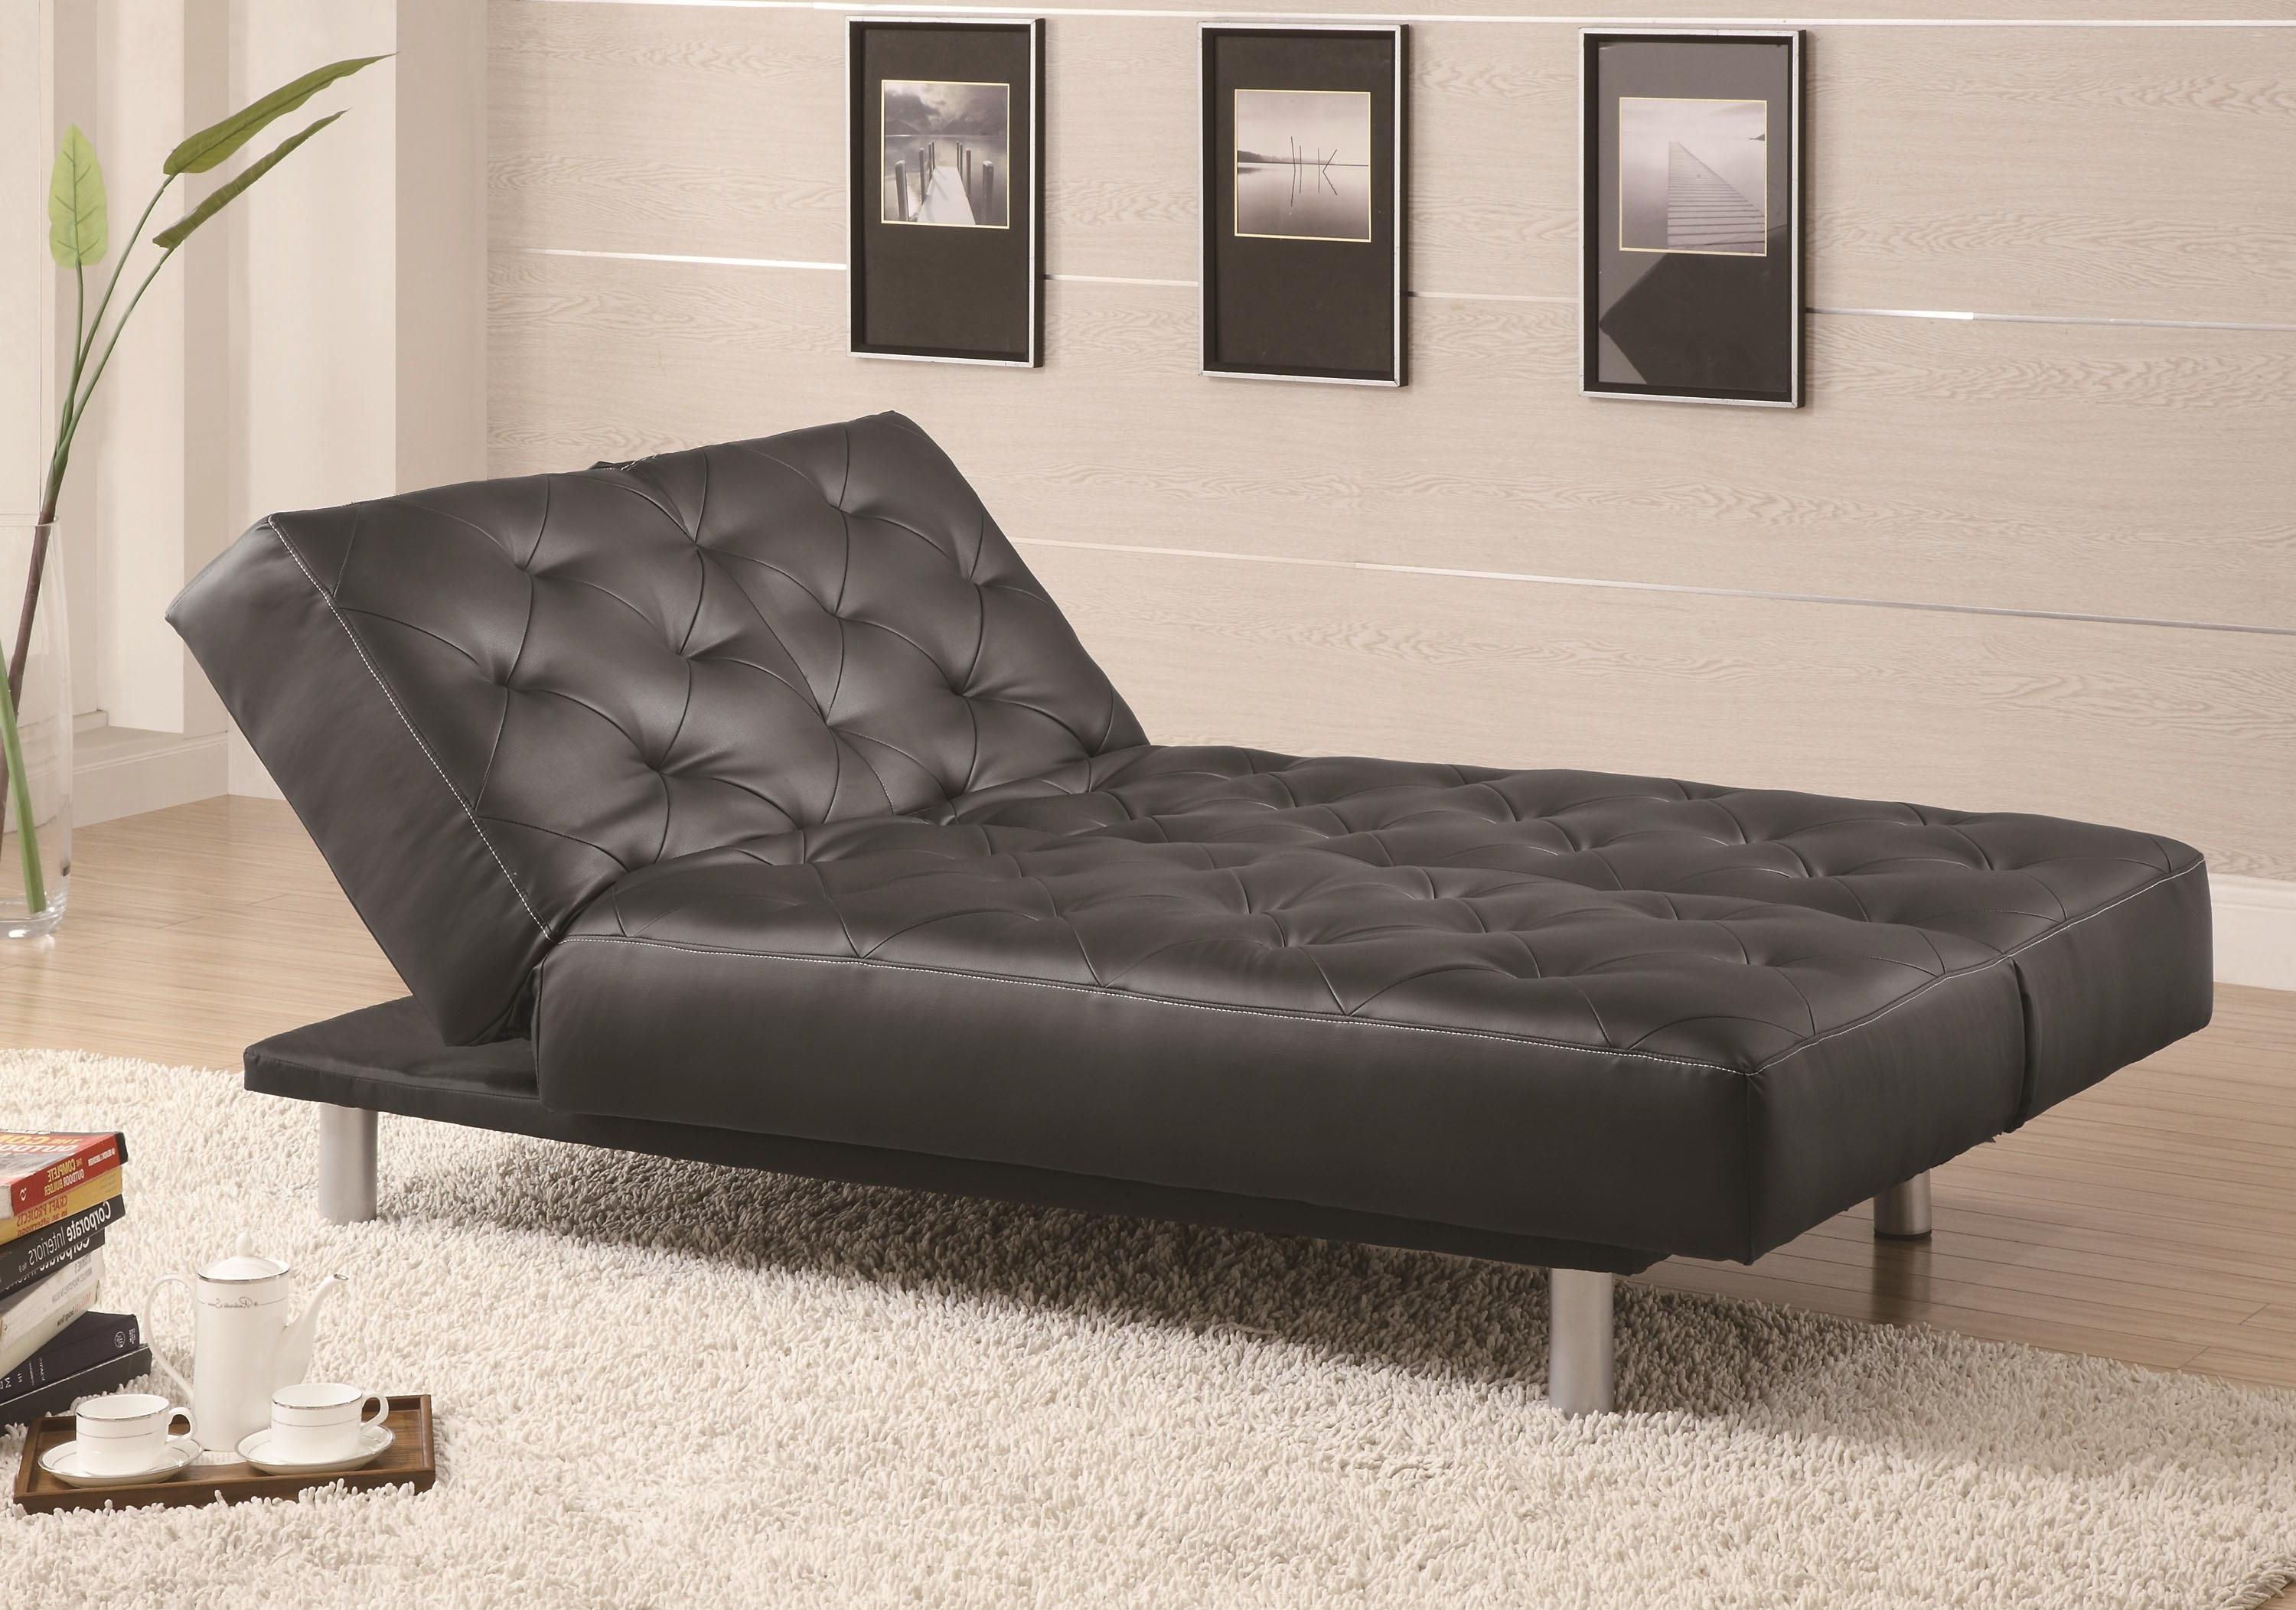 Well Liked Coaster Sofa Beds And Futons Black Vinyl Tufted Sofa Bed/oversize Regarding Convertible Chaise Lounges (View 9 of 15)